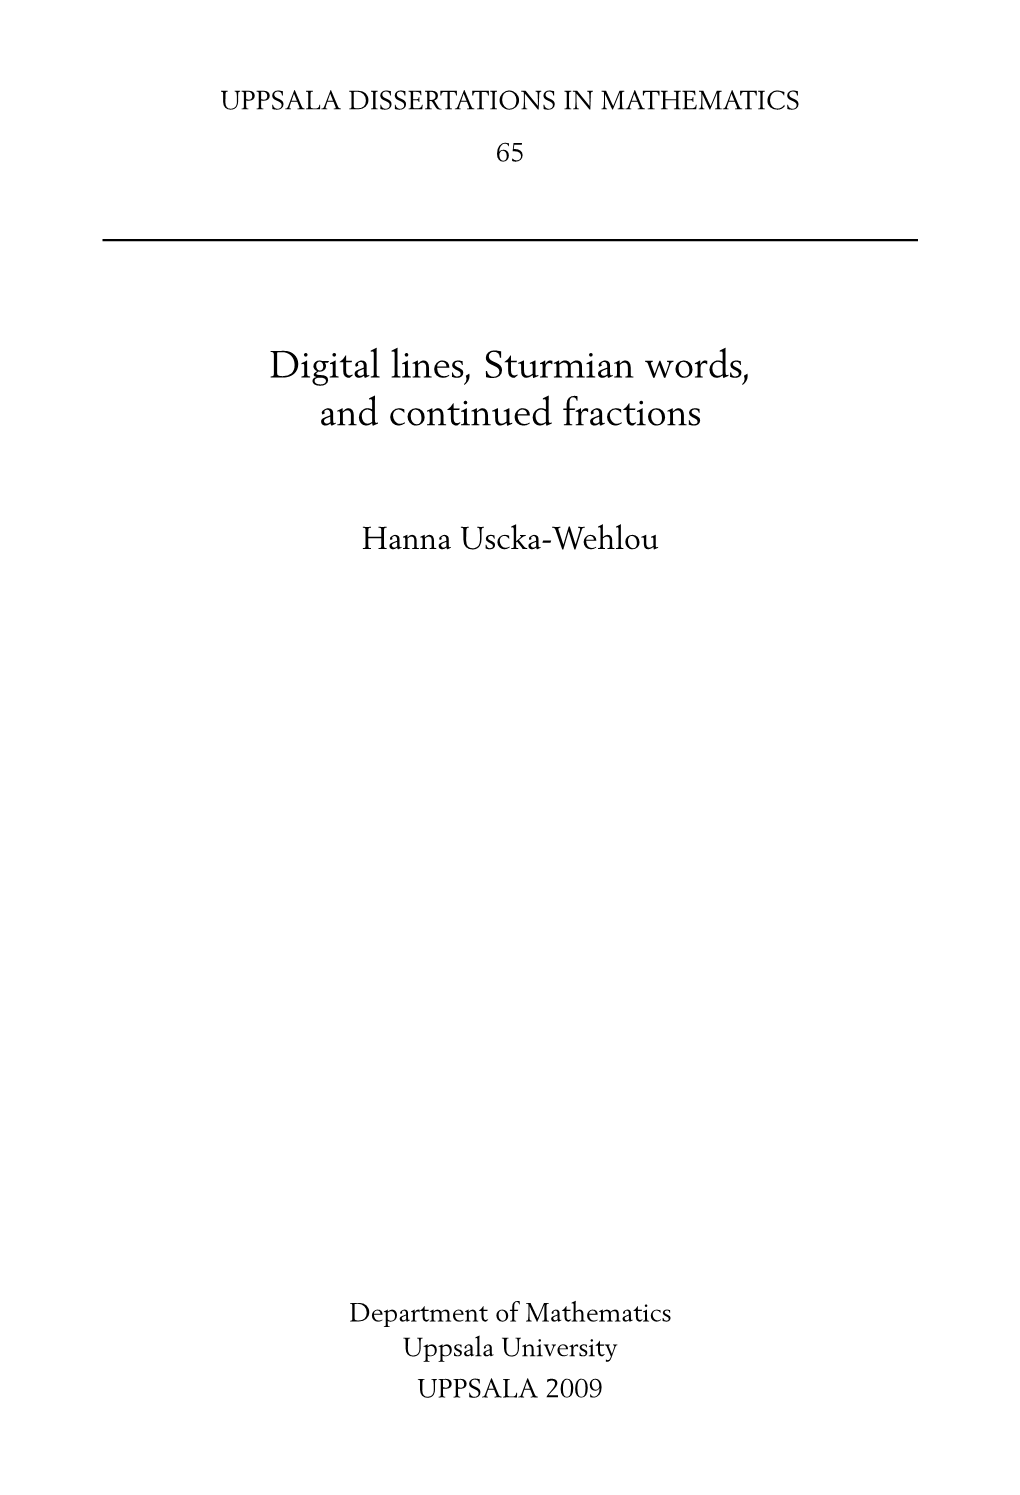 Digital Lines, Sturmian Words, and Continued Fractions